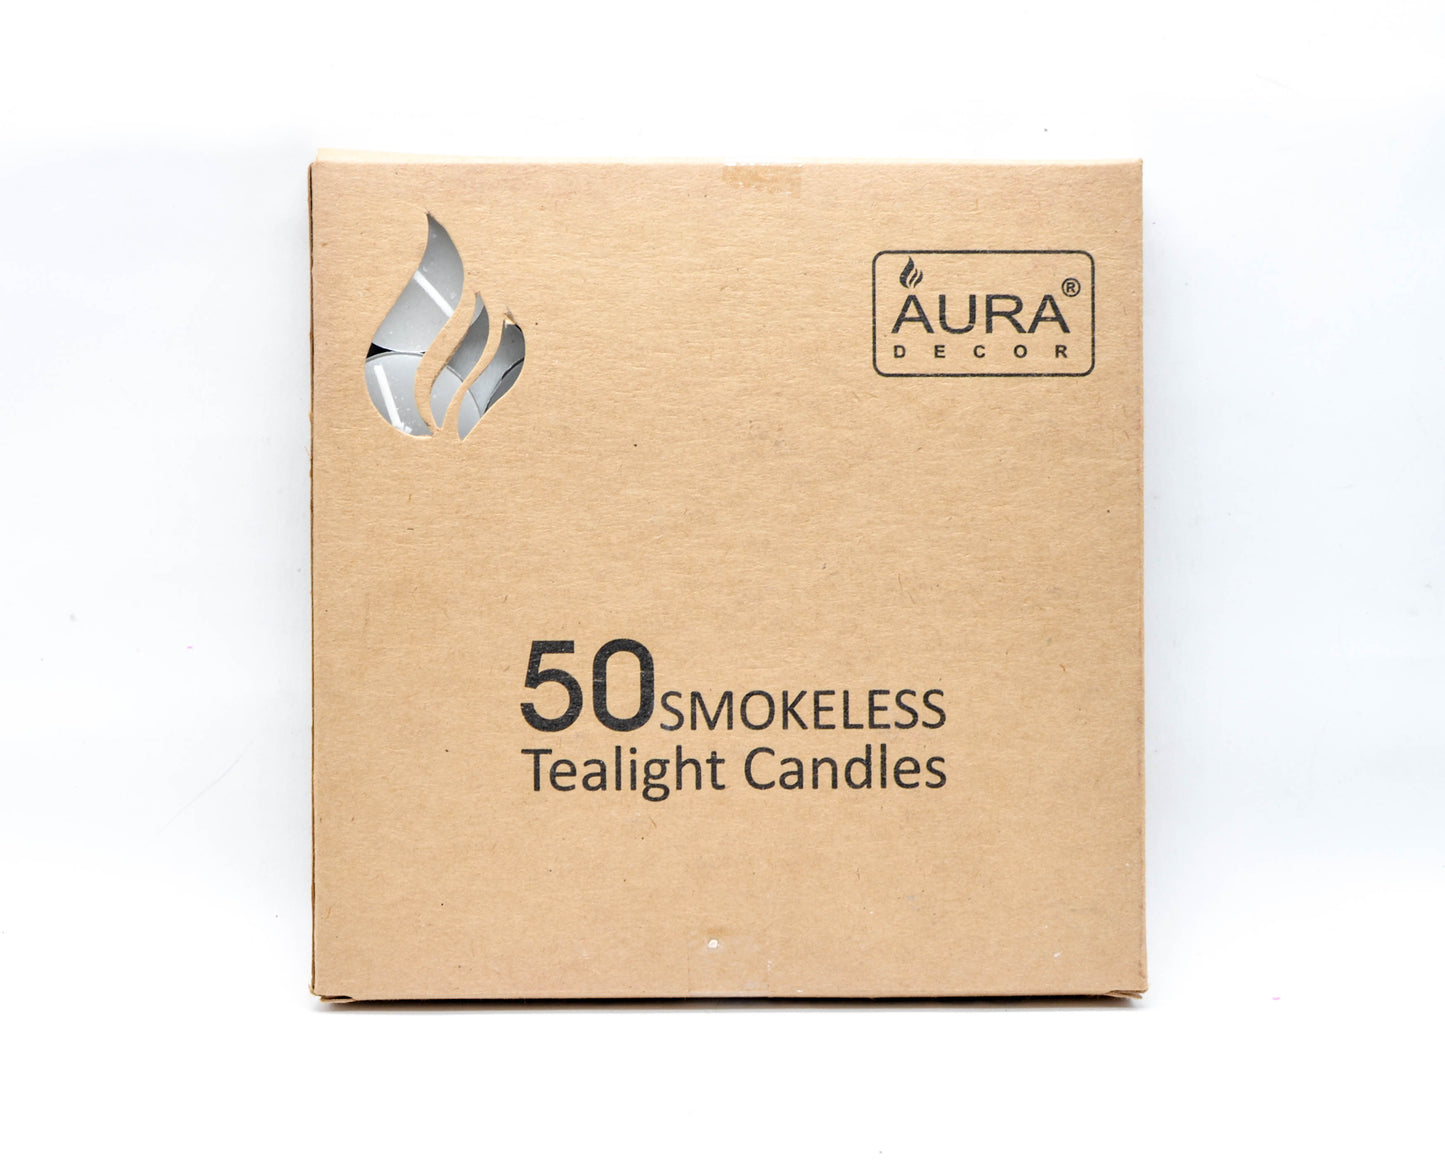 Pack of 50 Smokeless Tealight Candle (Burning Time 2.5 hours approx) - auradecor.co.in